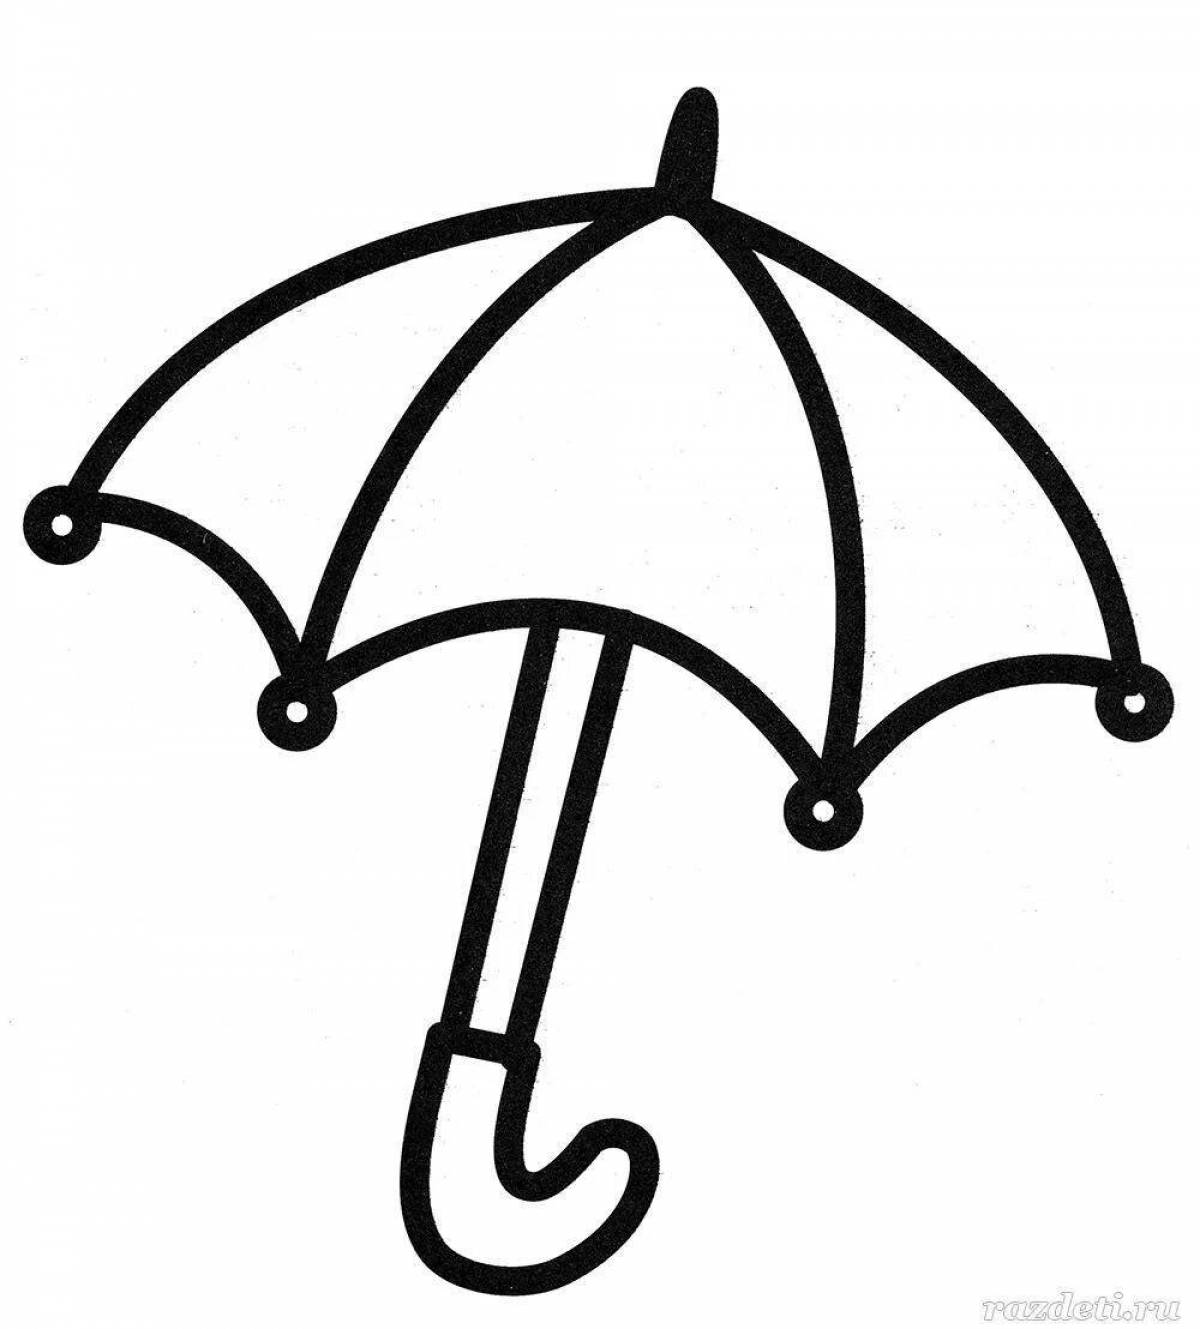 Delightful umbrella coloring book for children 3-4 years old